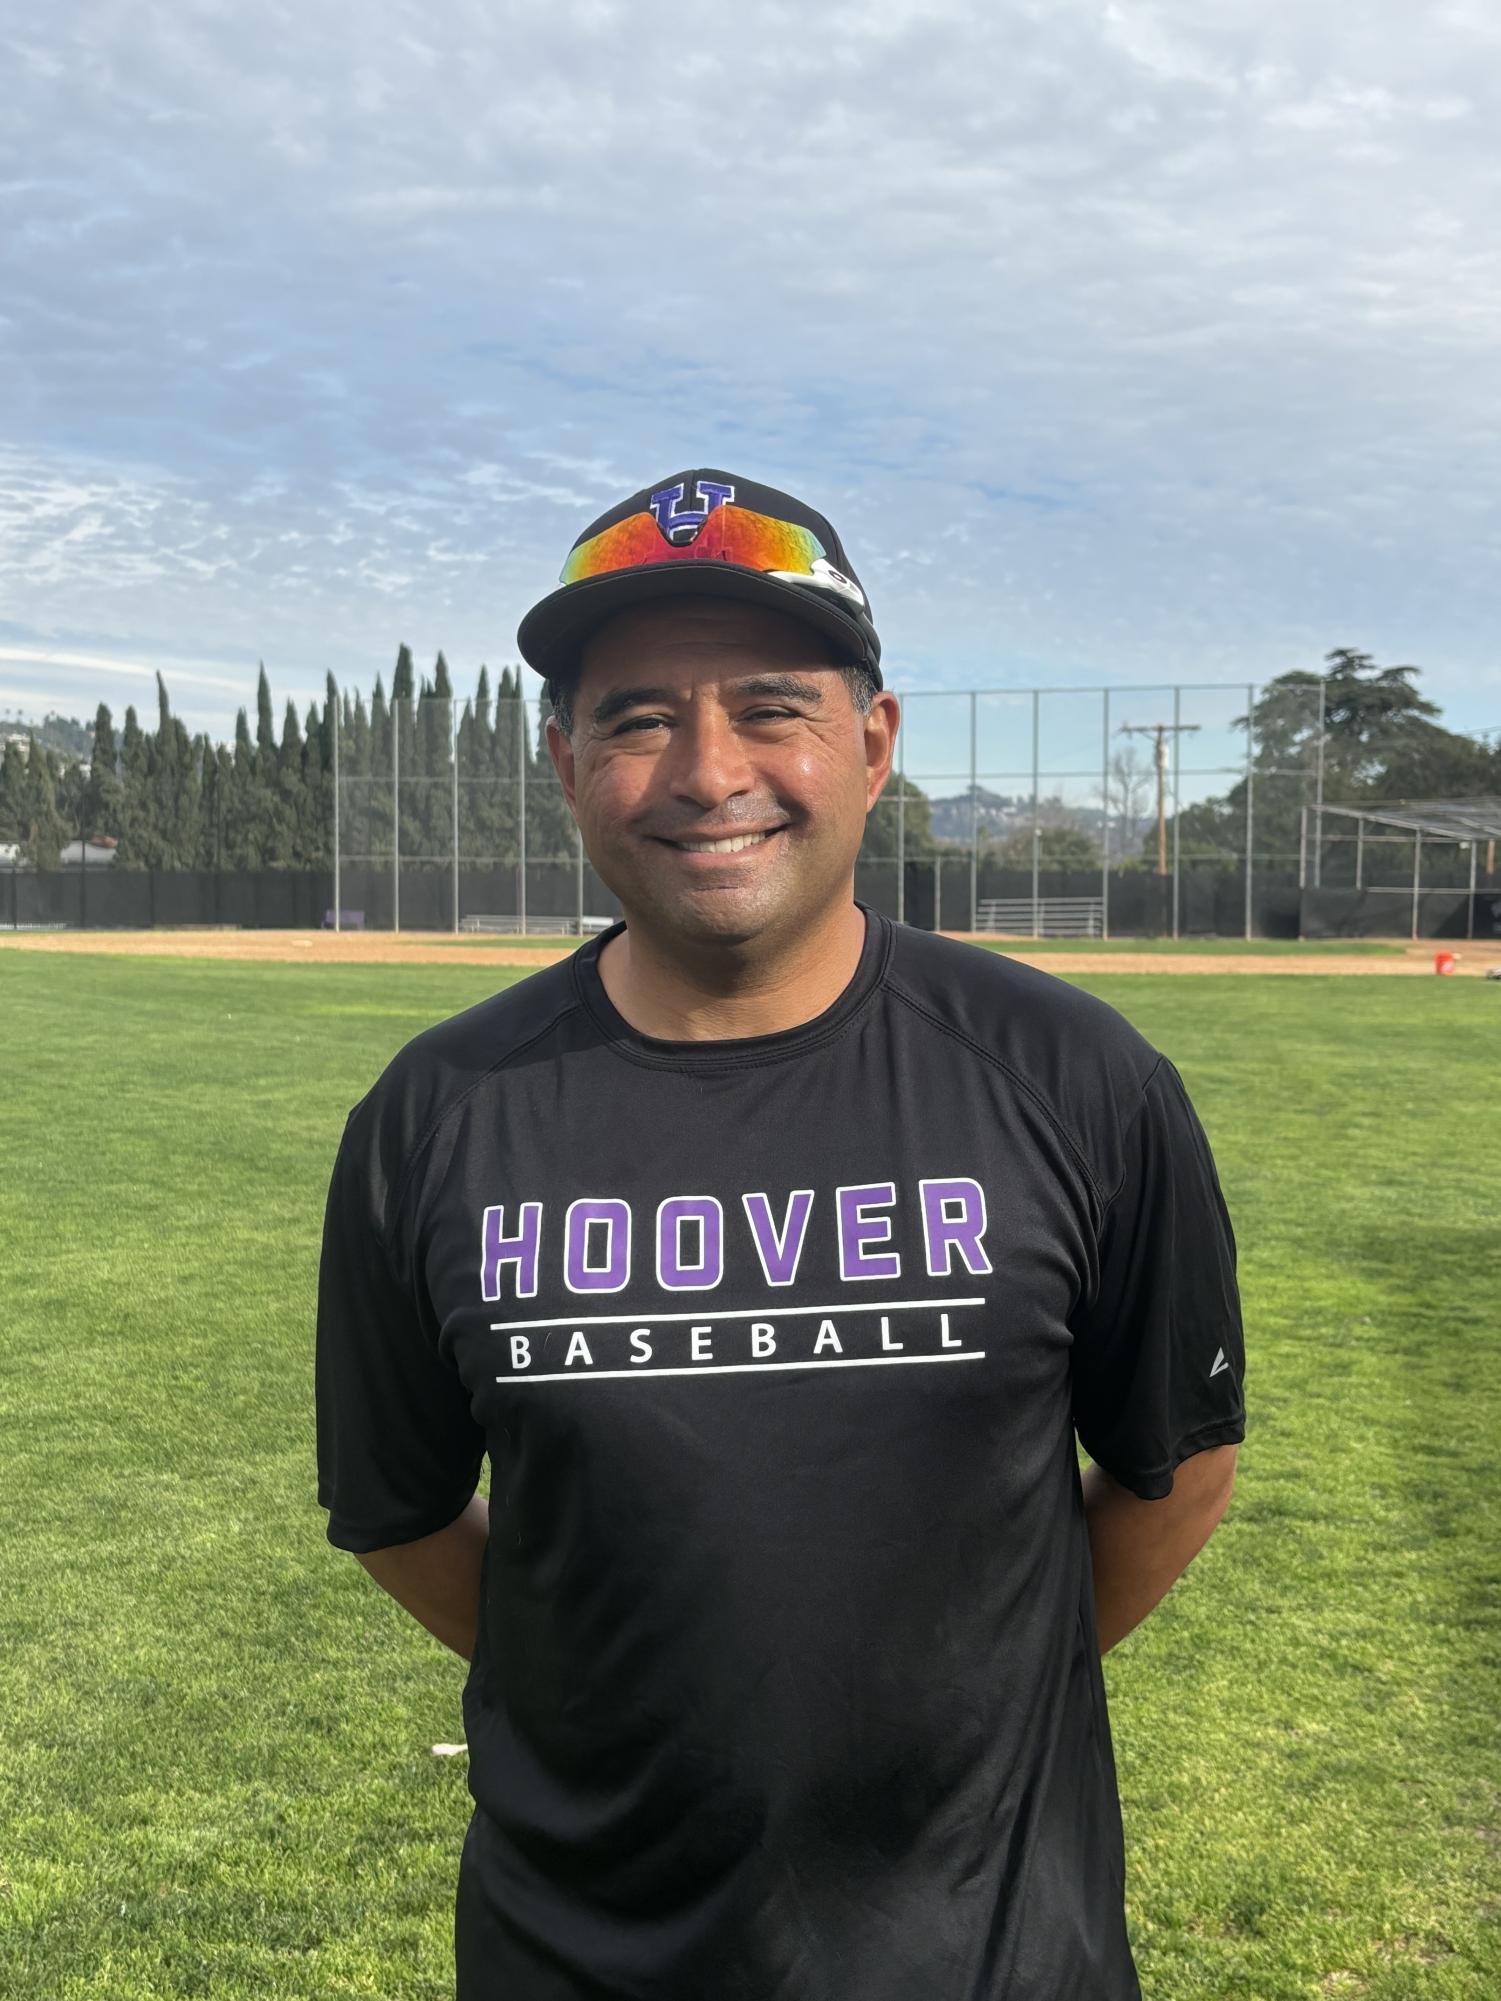 Hoover High Names Frank Edward Vega New Baseball Coach with 8 Years of Experience